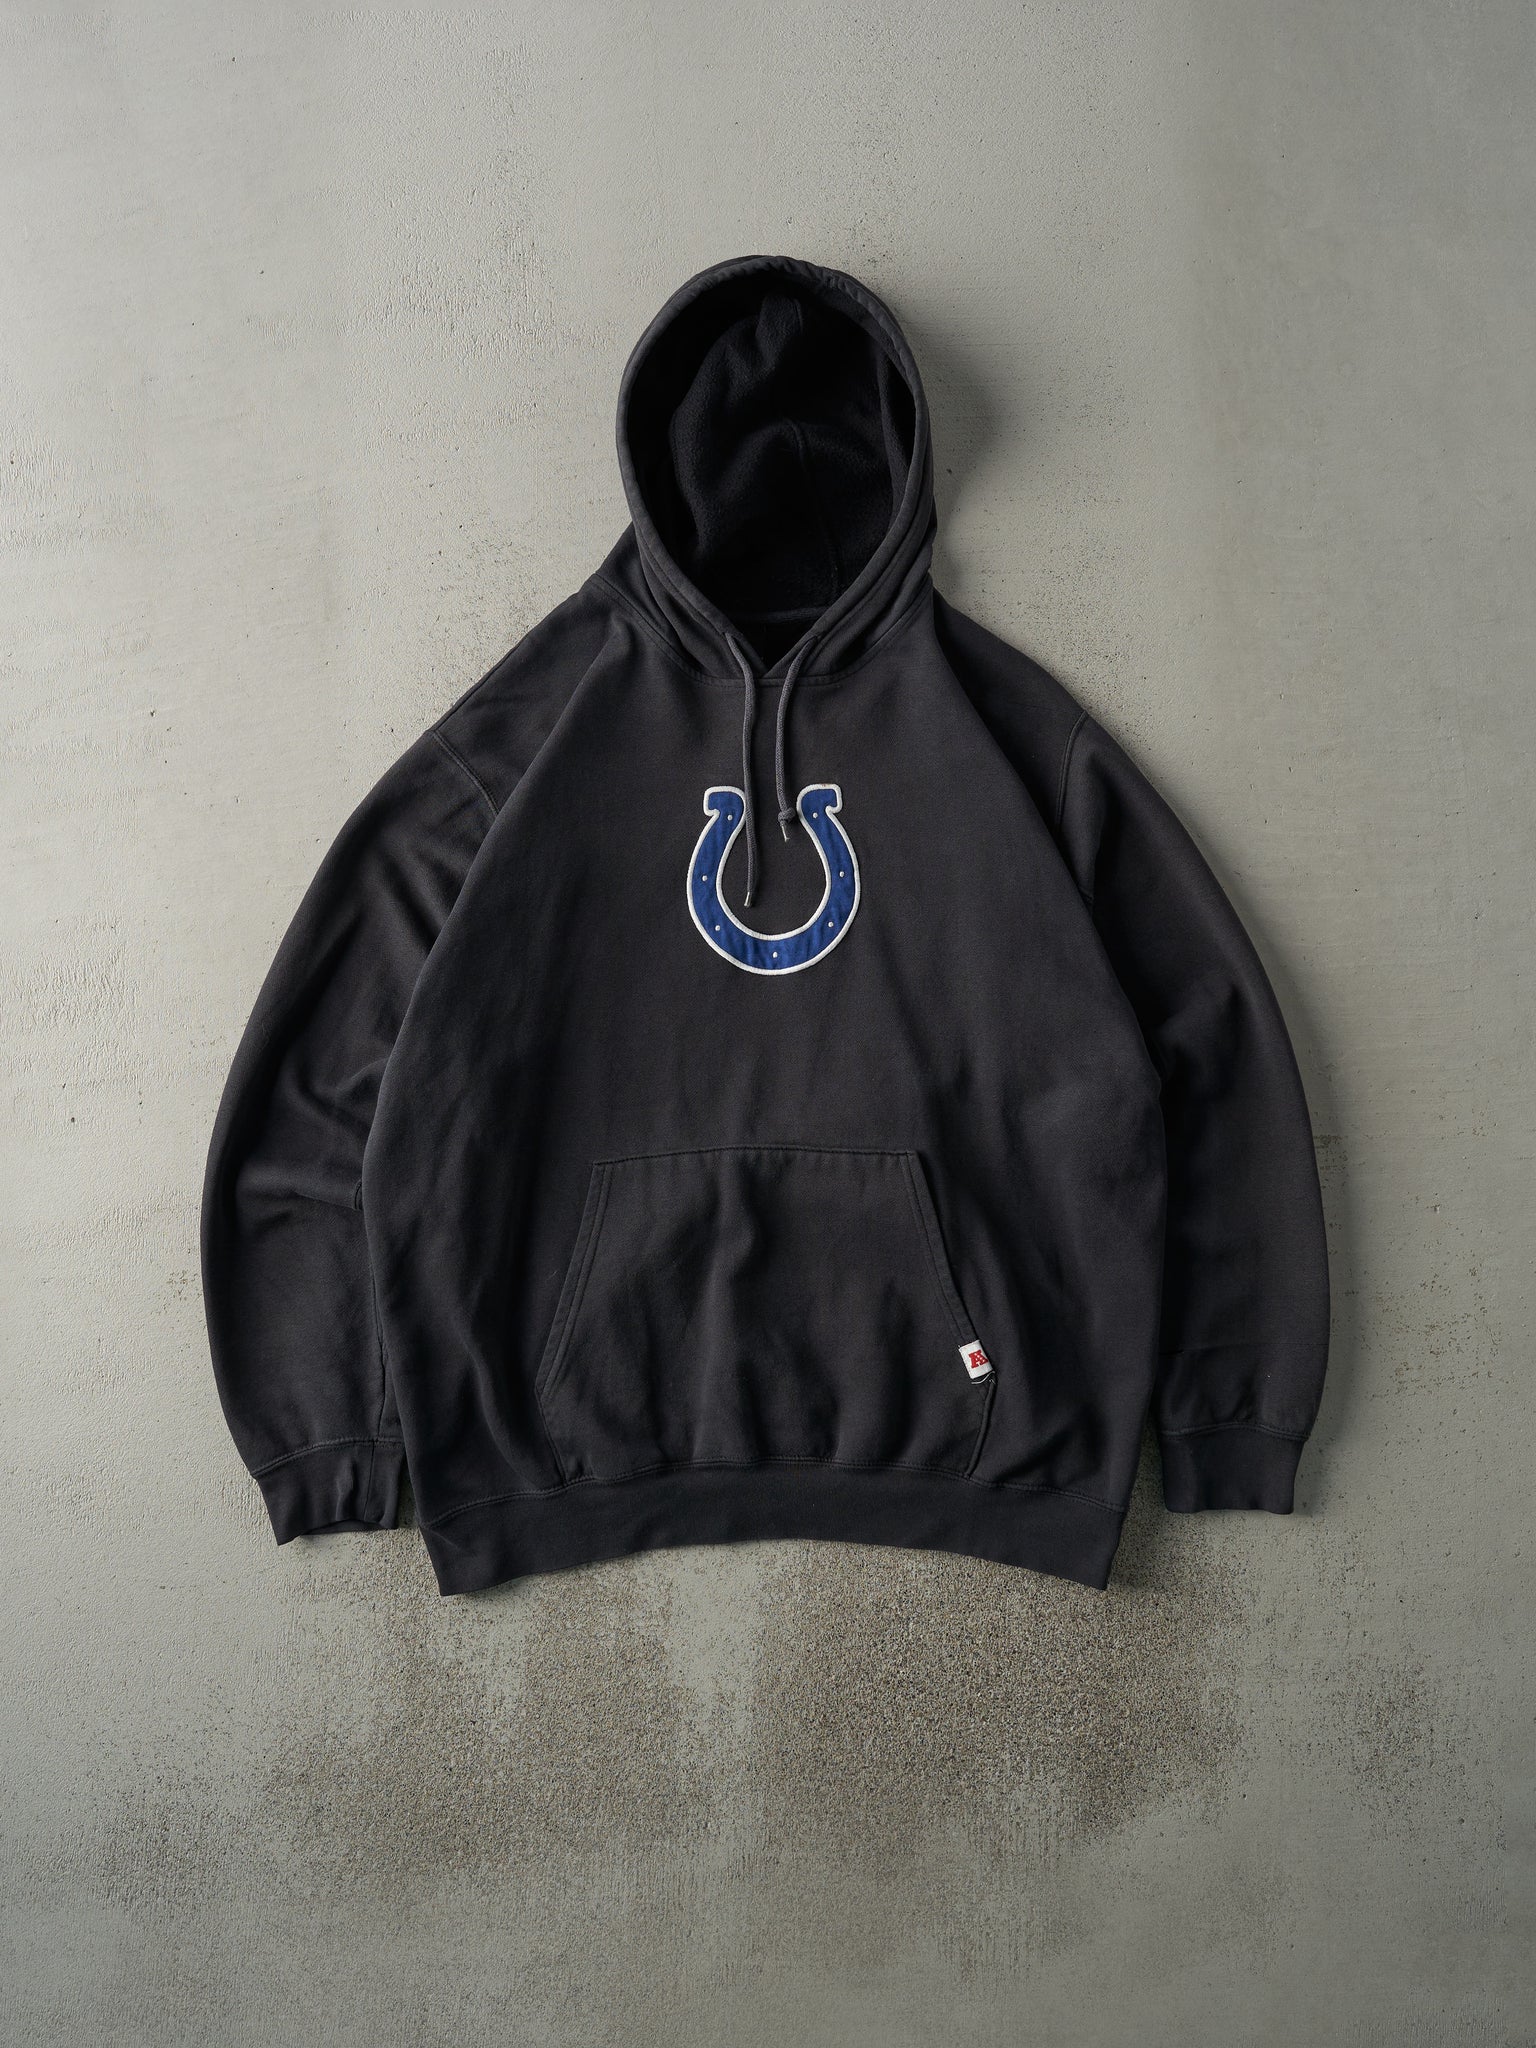 Vintage 90s Faded Black Embroidered Indianapolis Colts Hoodie (L)